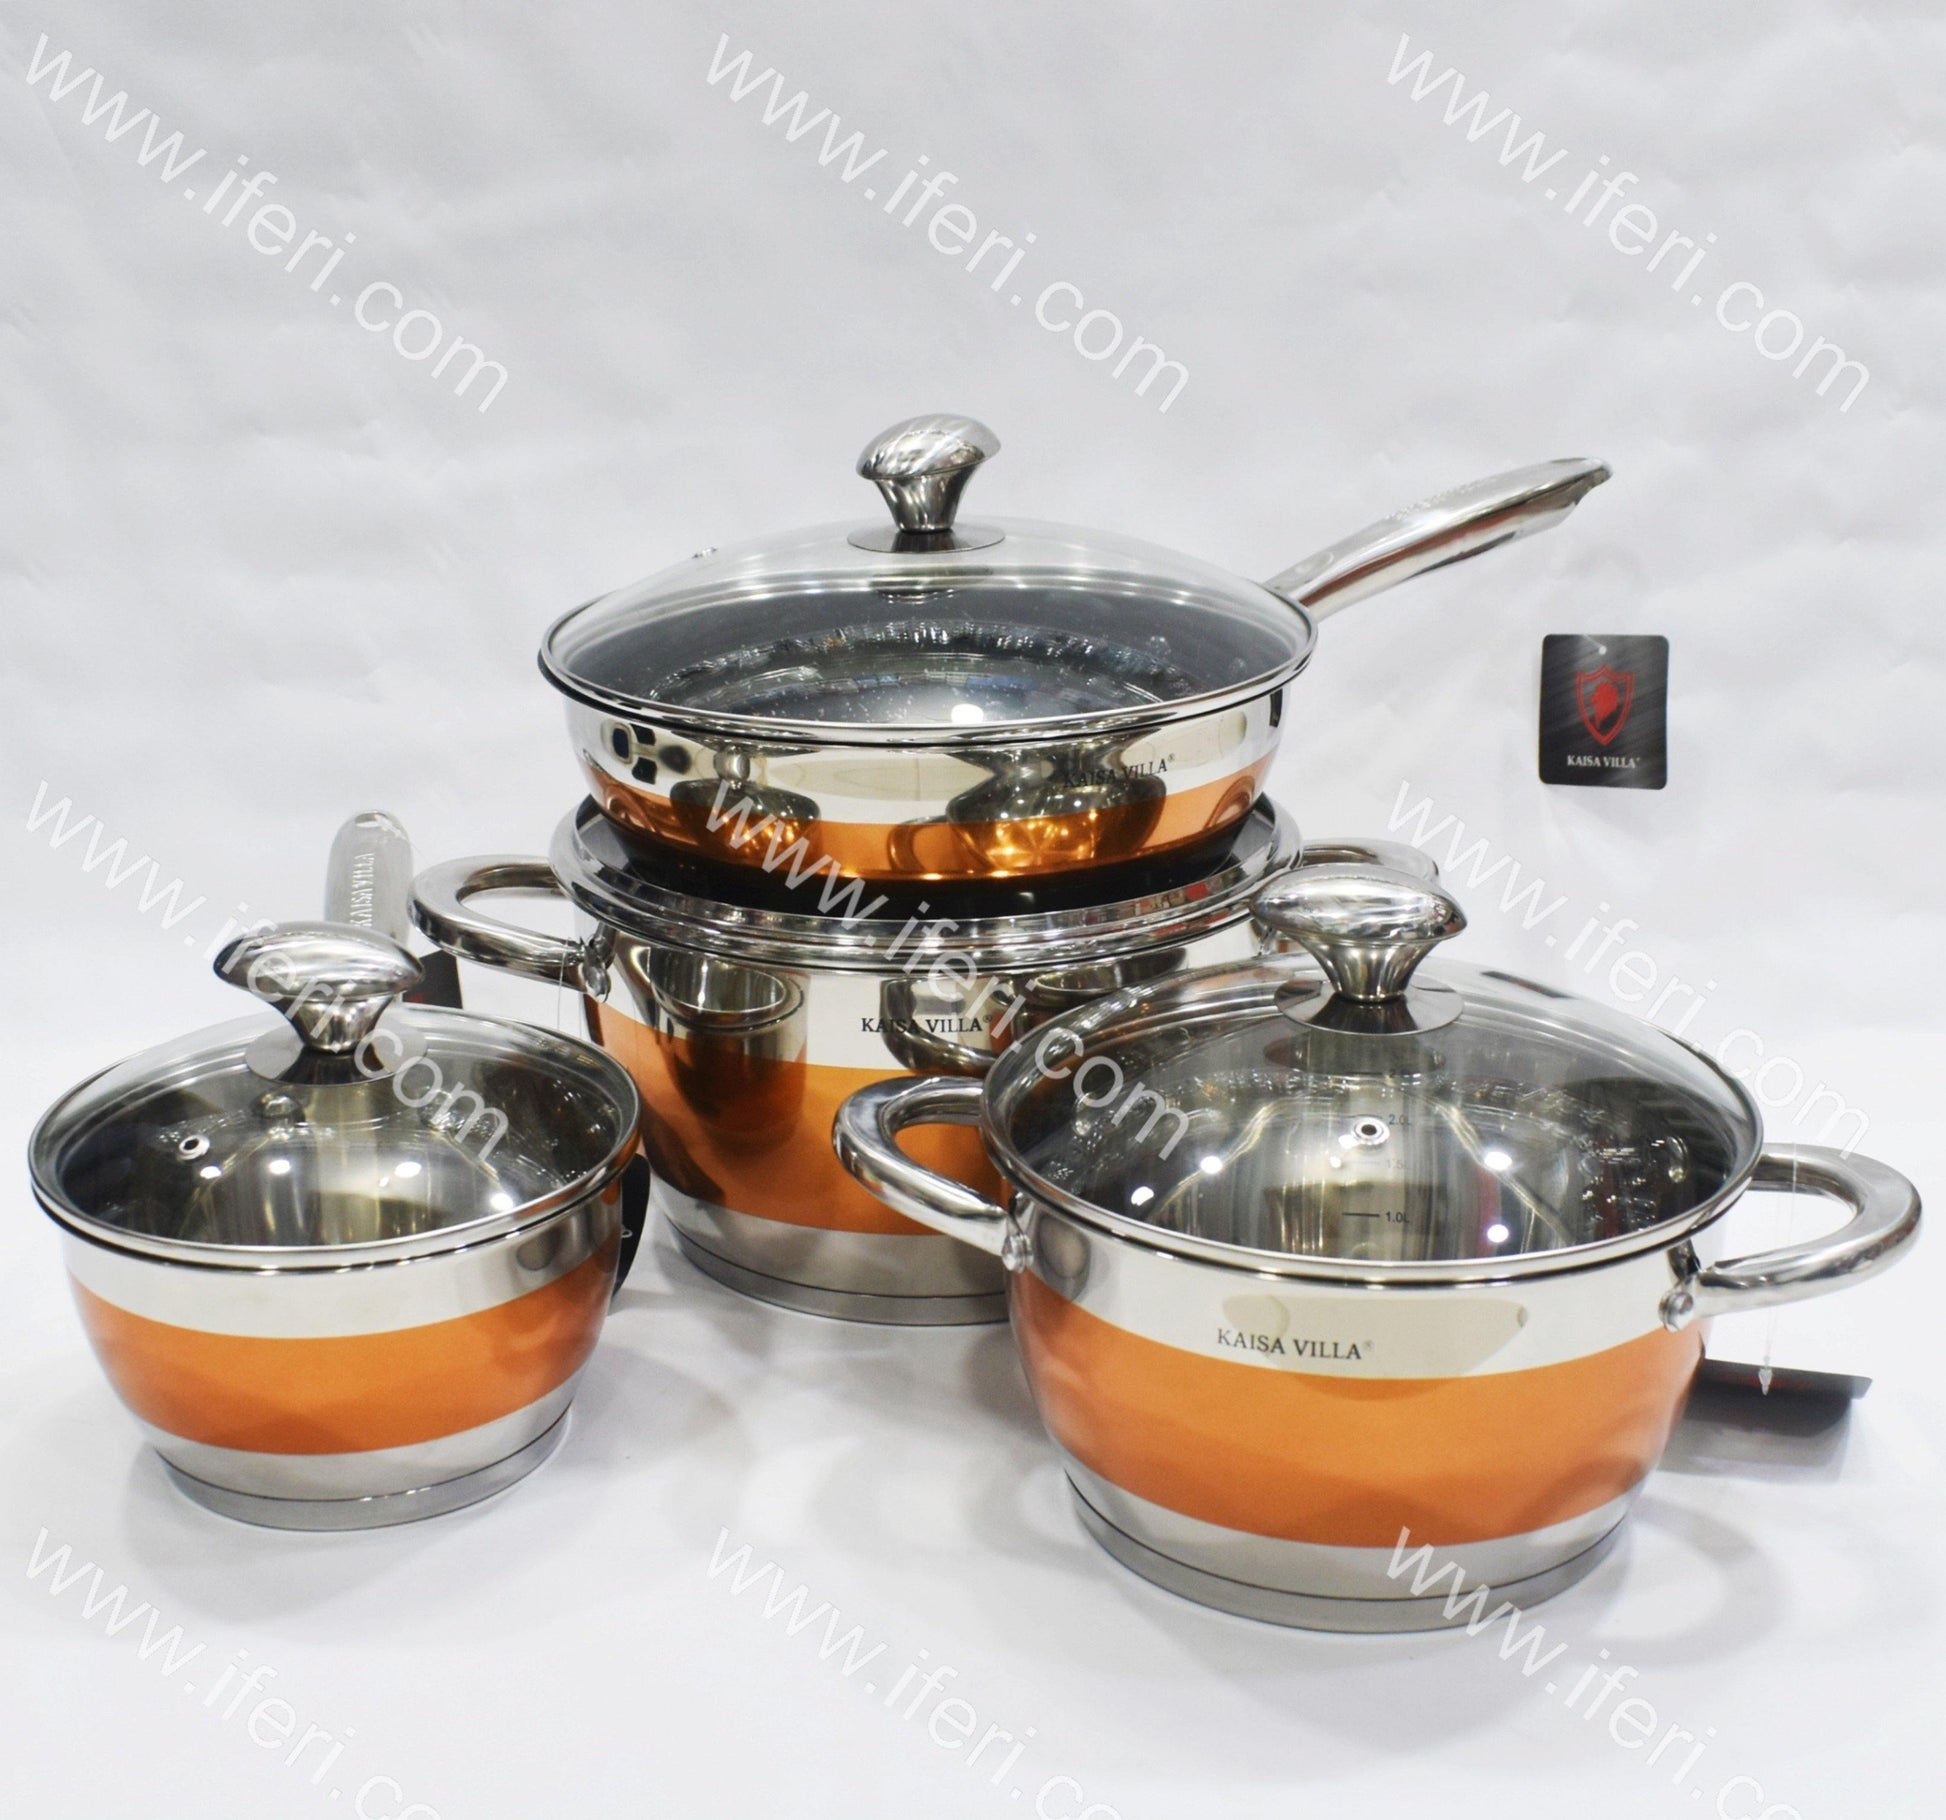 8 Pcs Stainless Steel Marble Coating Induction Based Cookware Set With Lid TG6352 - Price in BD at iferi.com